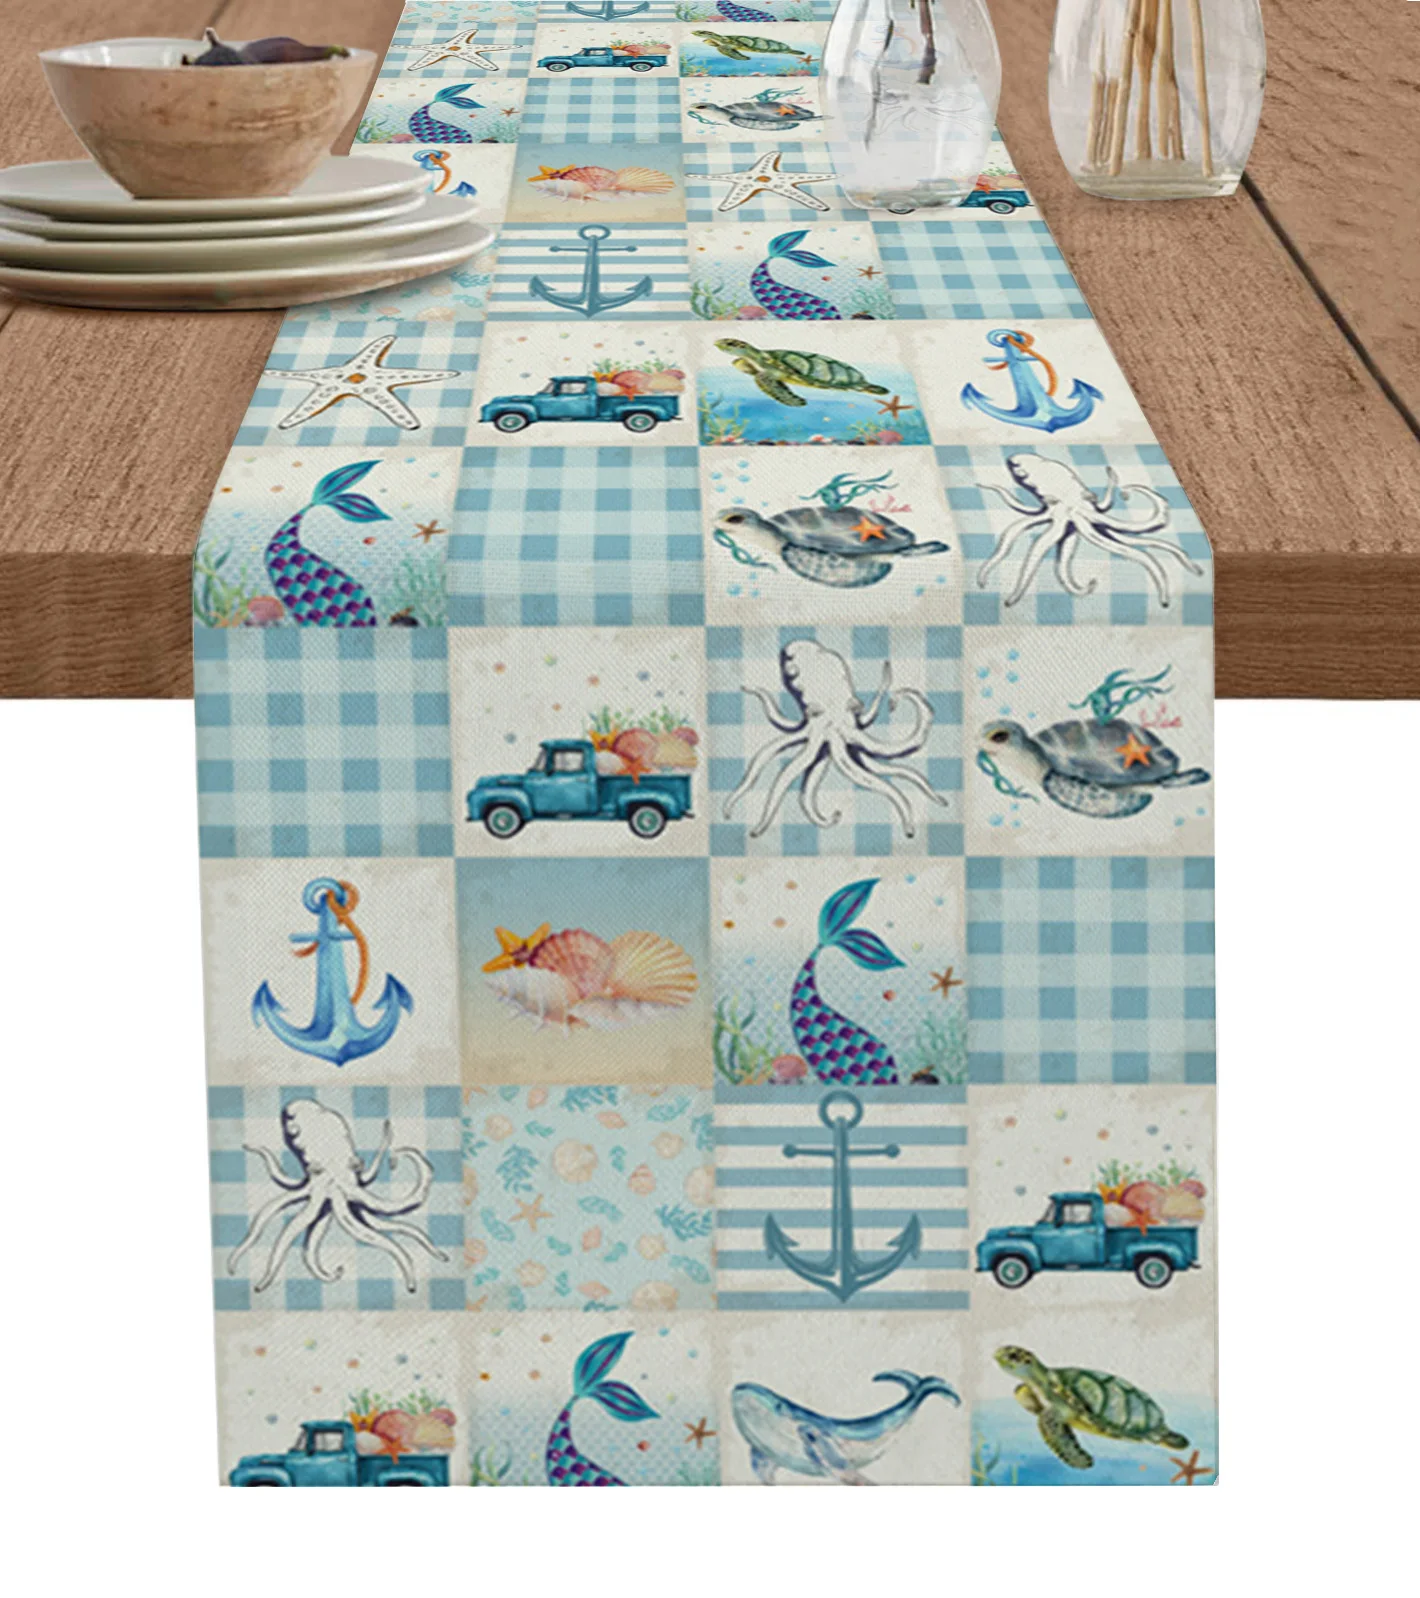 

Ocean Stripes Plaid Sea Turtle Starfish Wedding Decoration Table Runner Table Mats Desk Cabinet Cover Tablecloth Home Decor